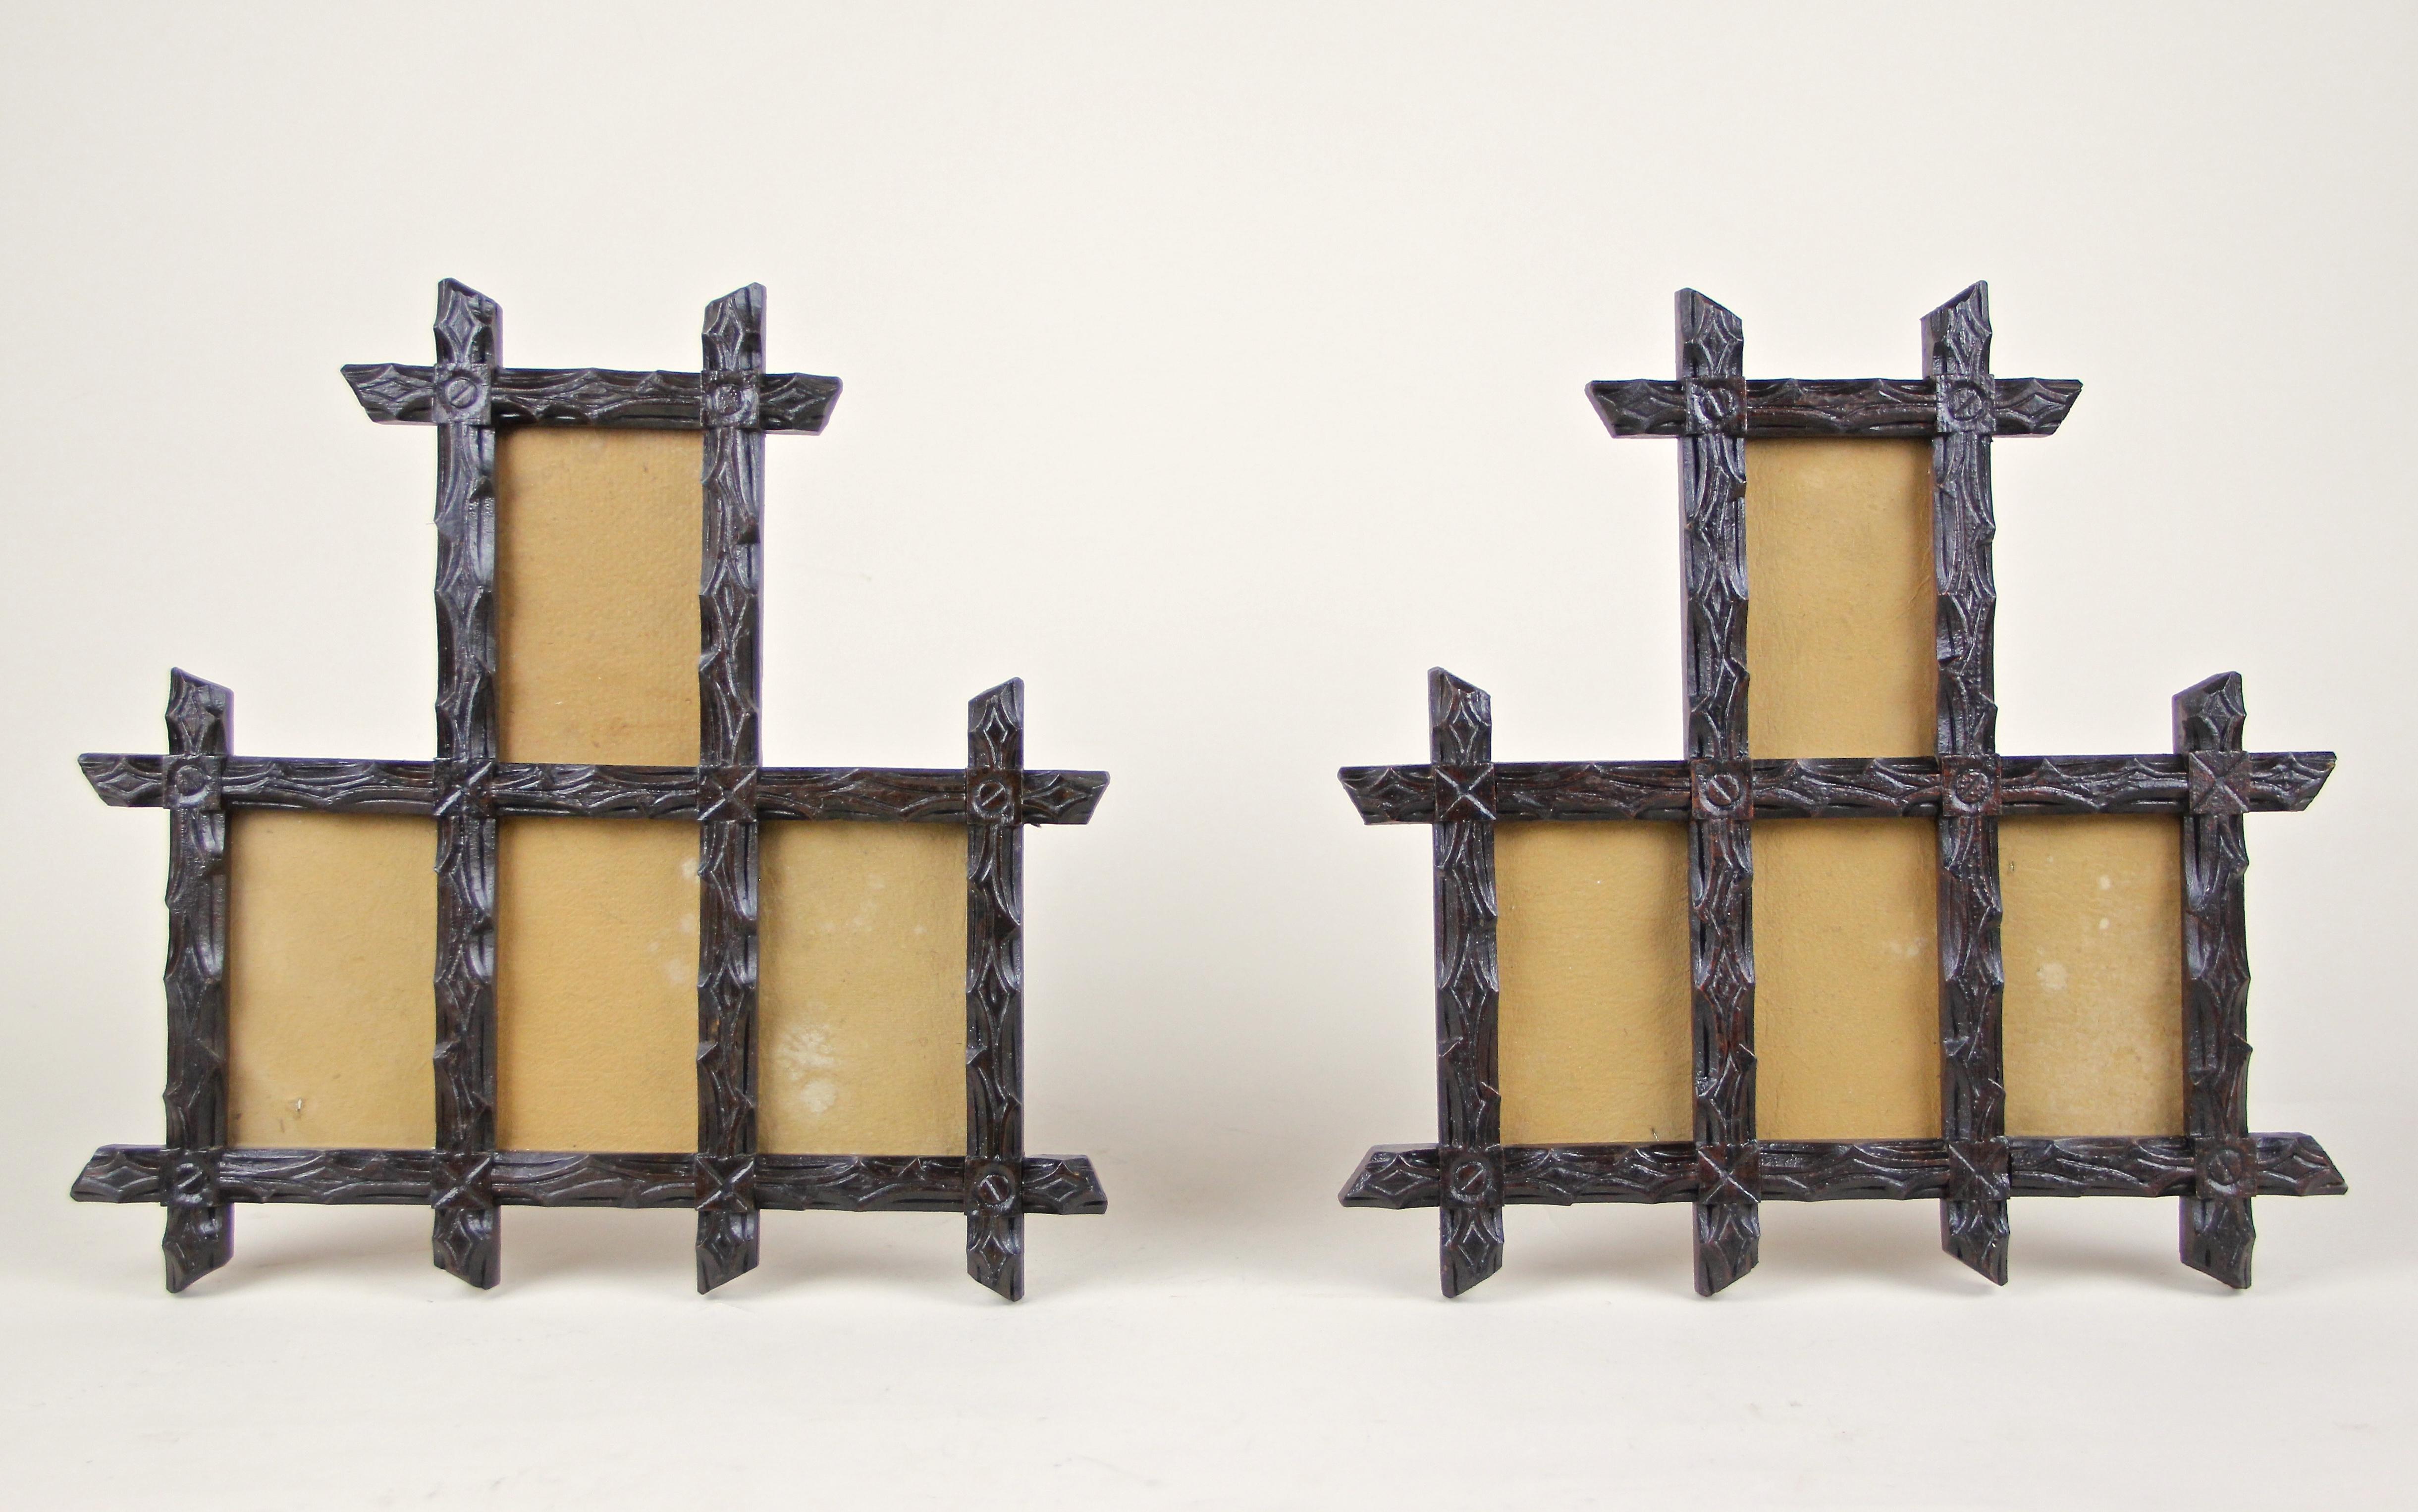 Rustic set of two 19th century Black Forest photo frames out of Austria, circa 1880. Artfully hand carved out of basswood, this frame shows a fantastic design combined with beautiful protruding corners. This set of very decorative Black Forest